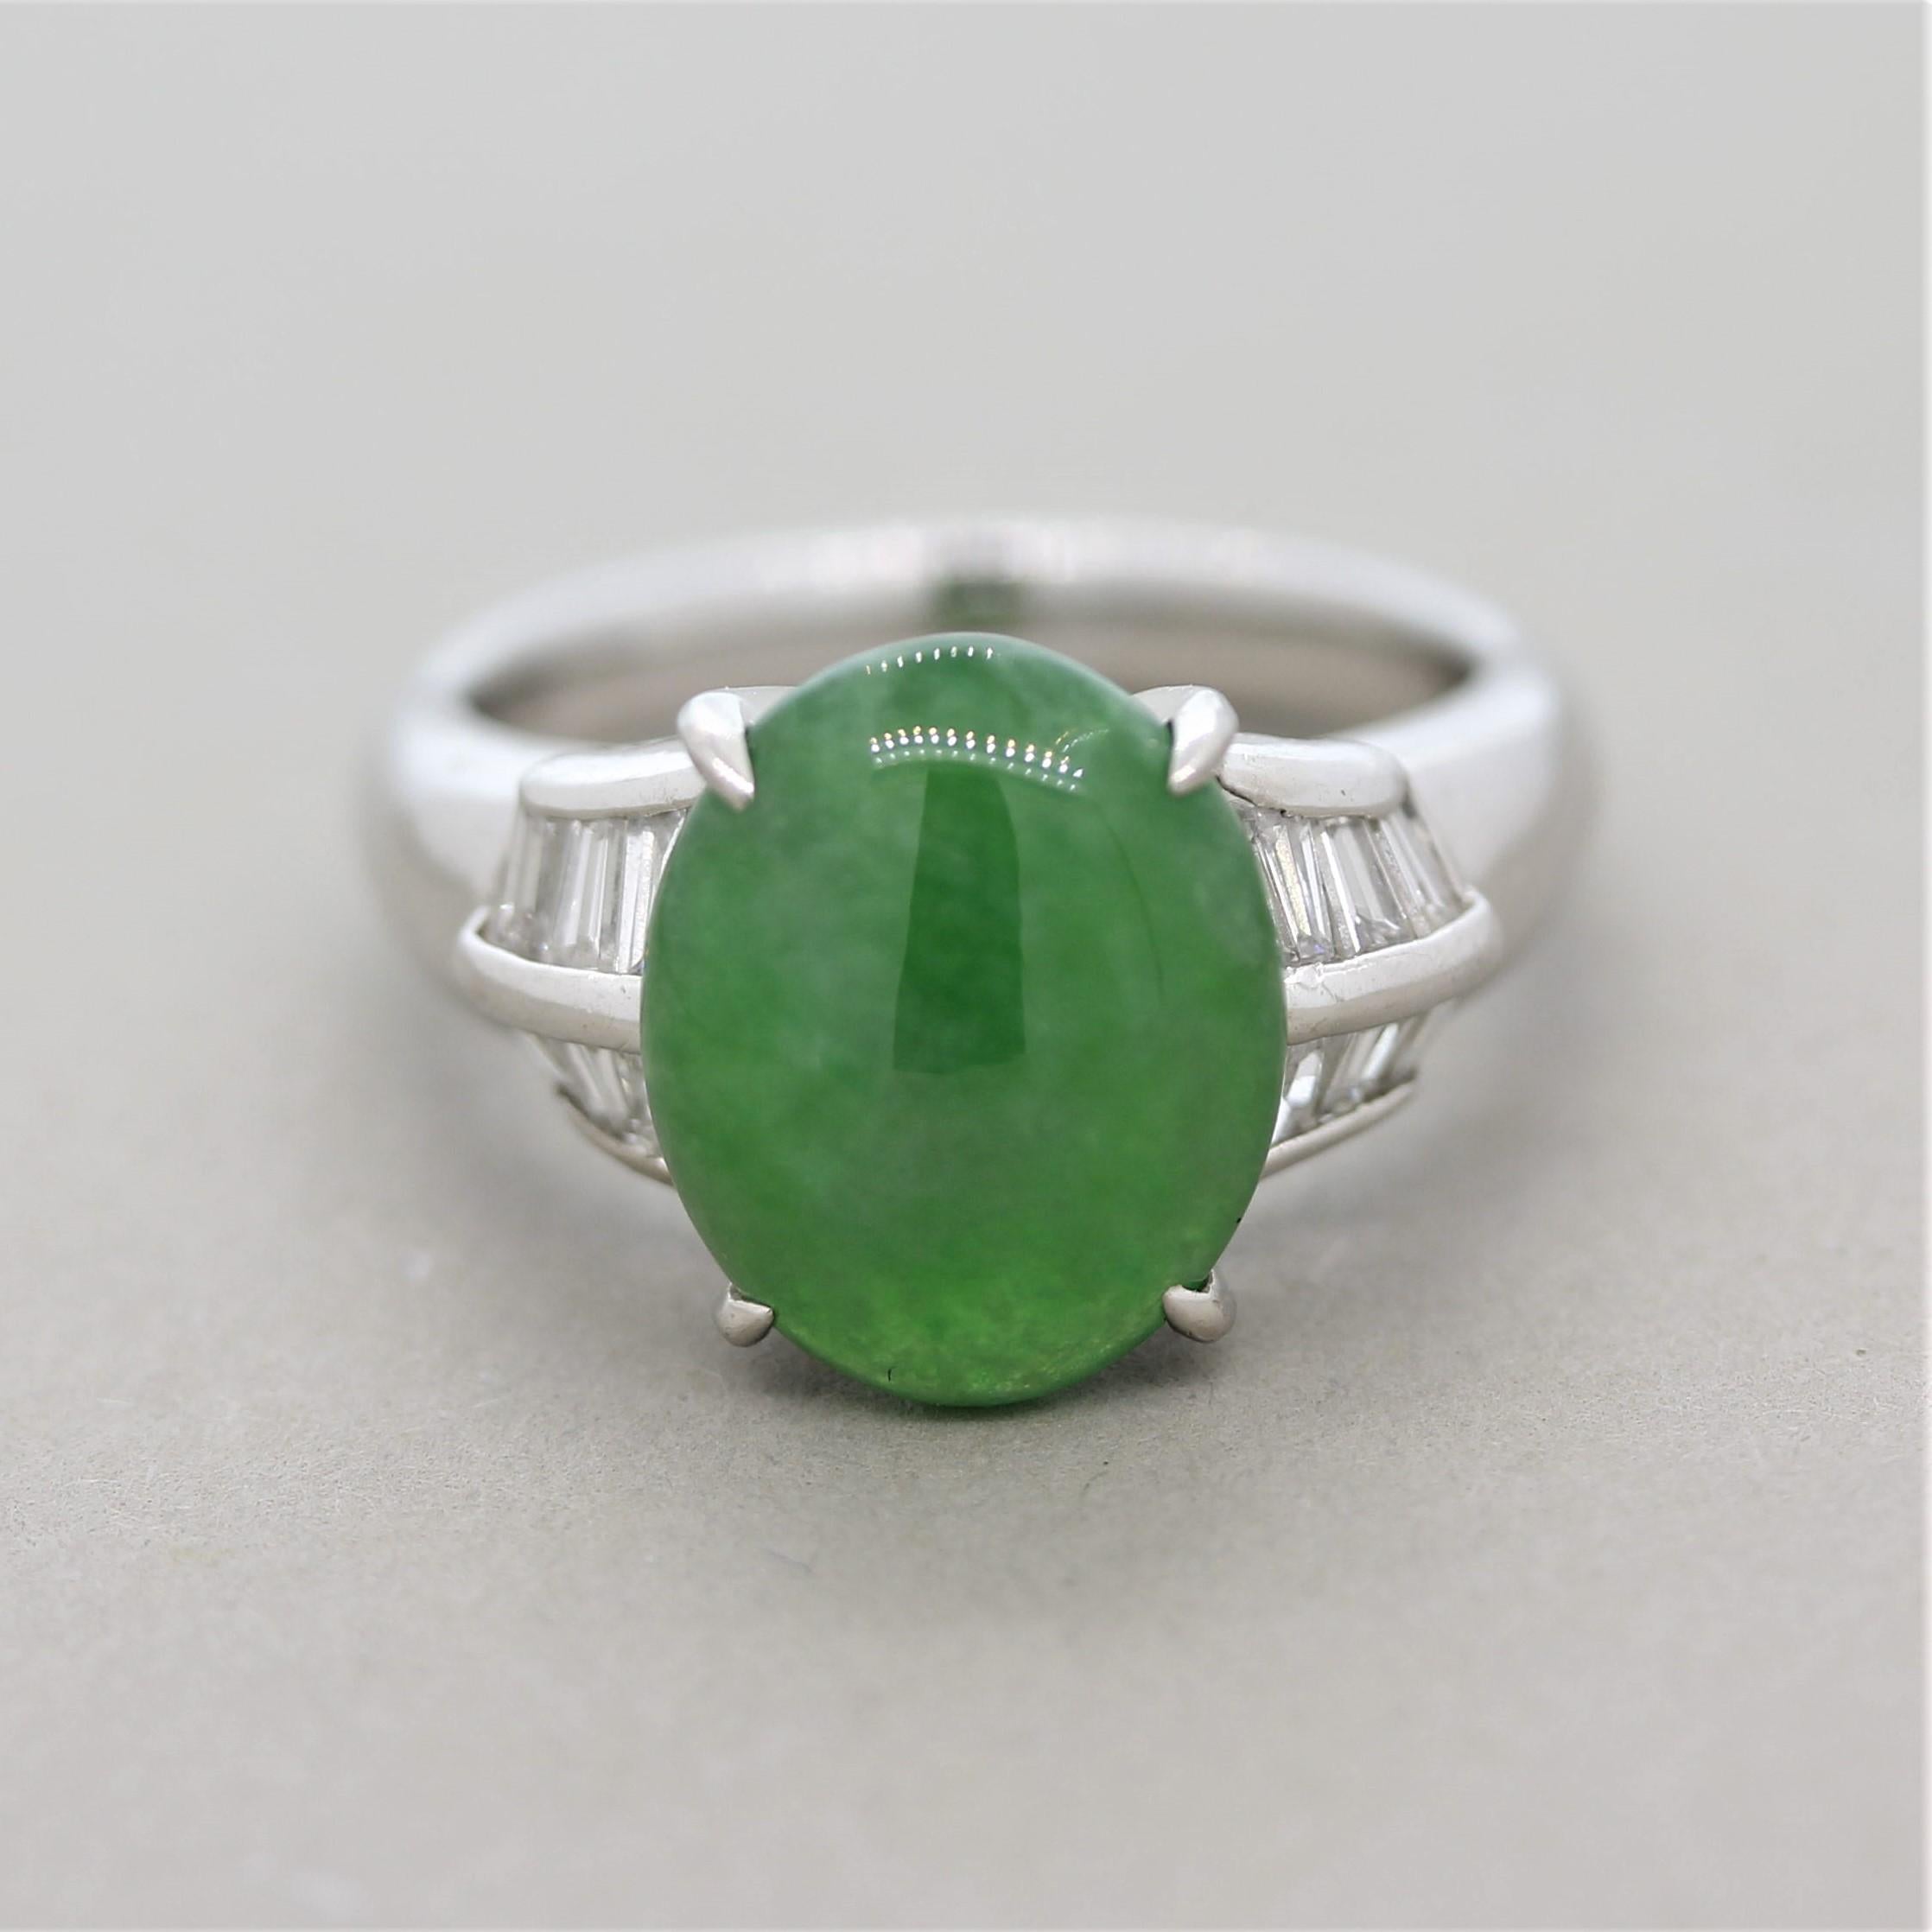 A sweet piece of jade weighing 4.64 carats takes center stage of this platinum ring. It has a rich green color and a smooth polish allowing light to evenly roll off its surface. It is accented by 0.47 carats of baguette cut diamonds set on the